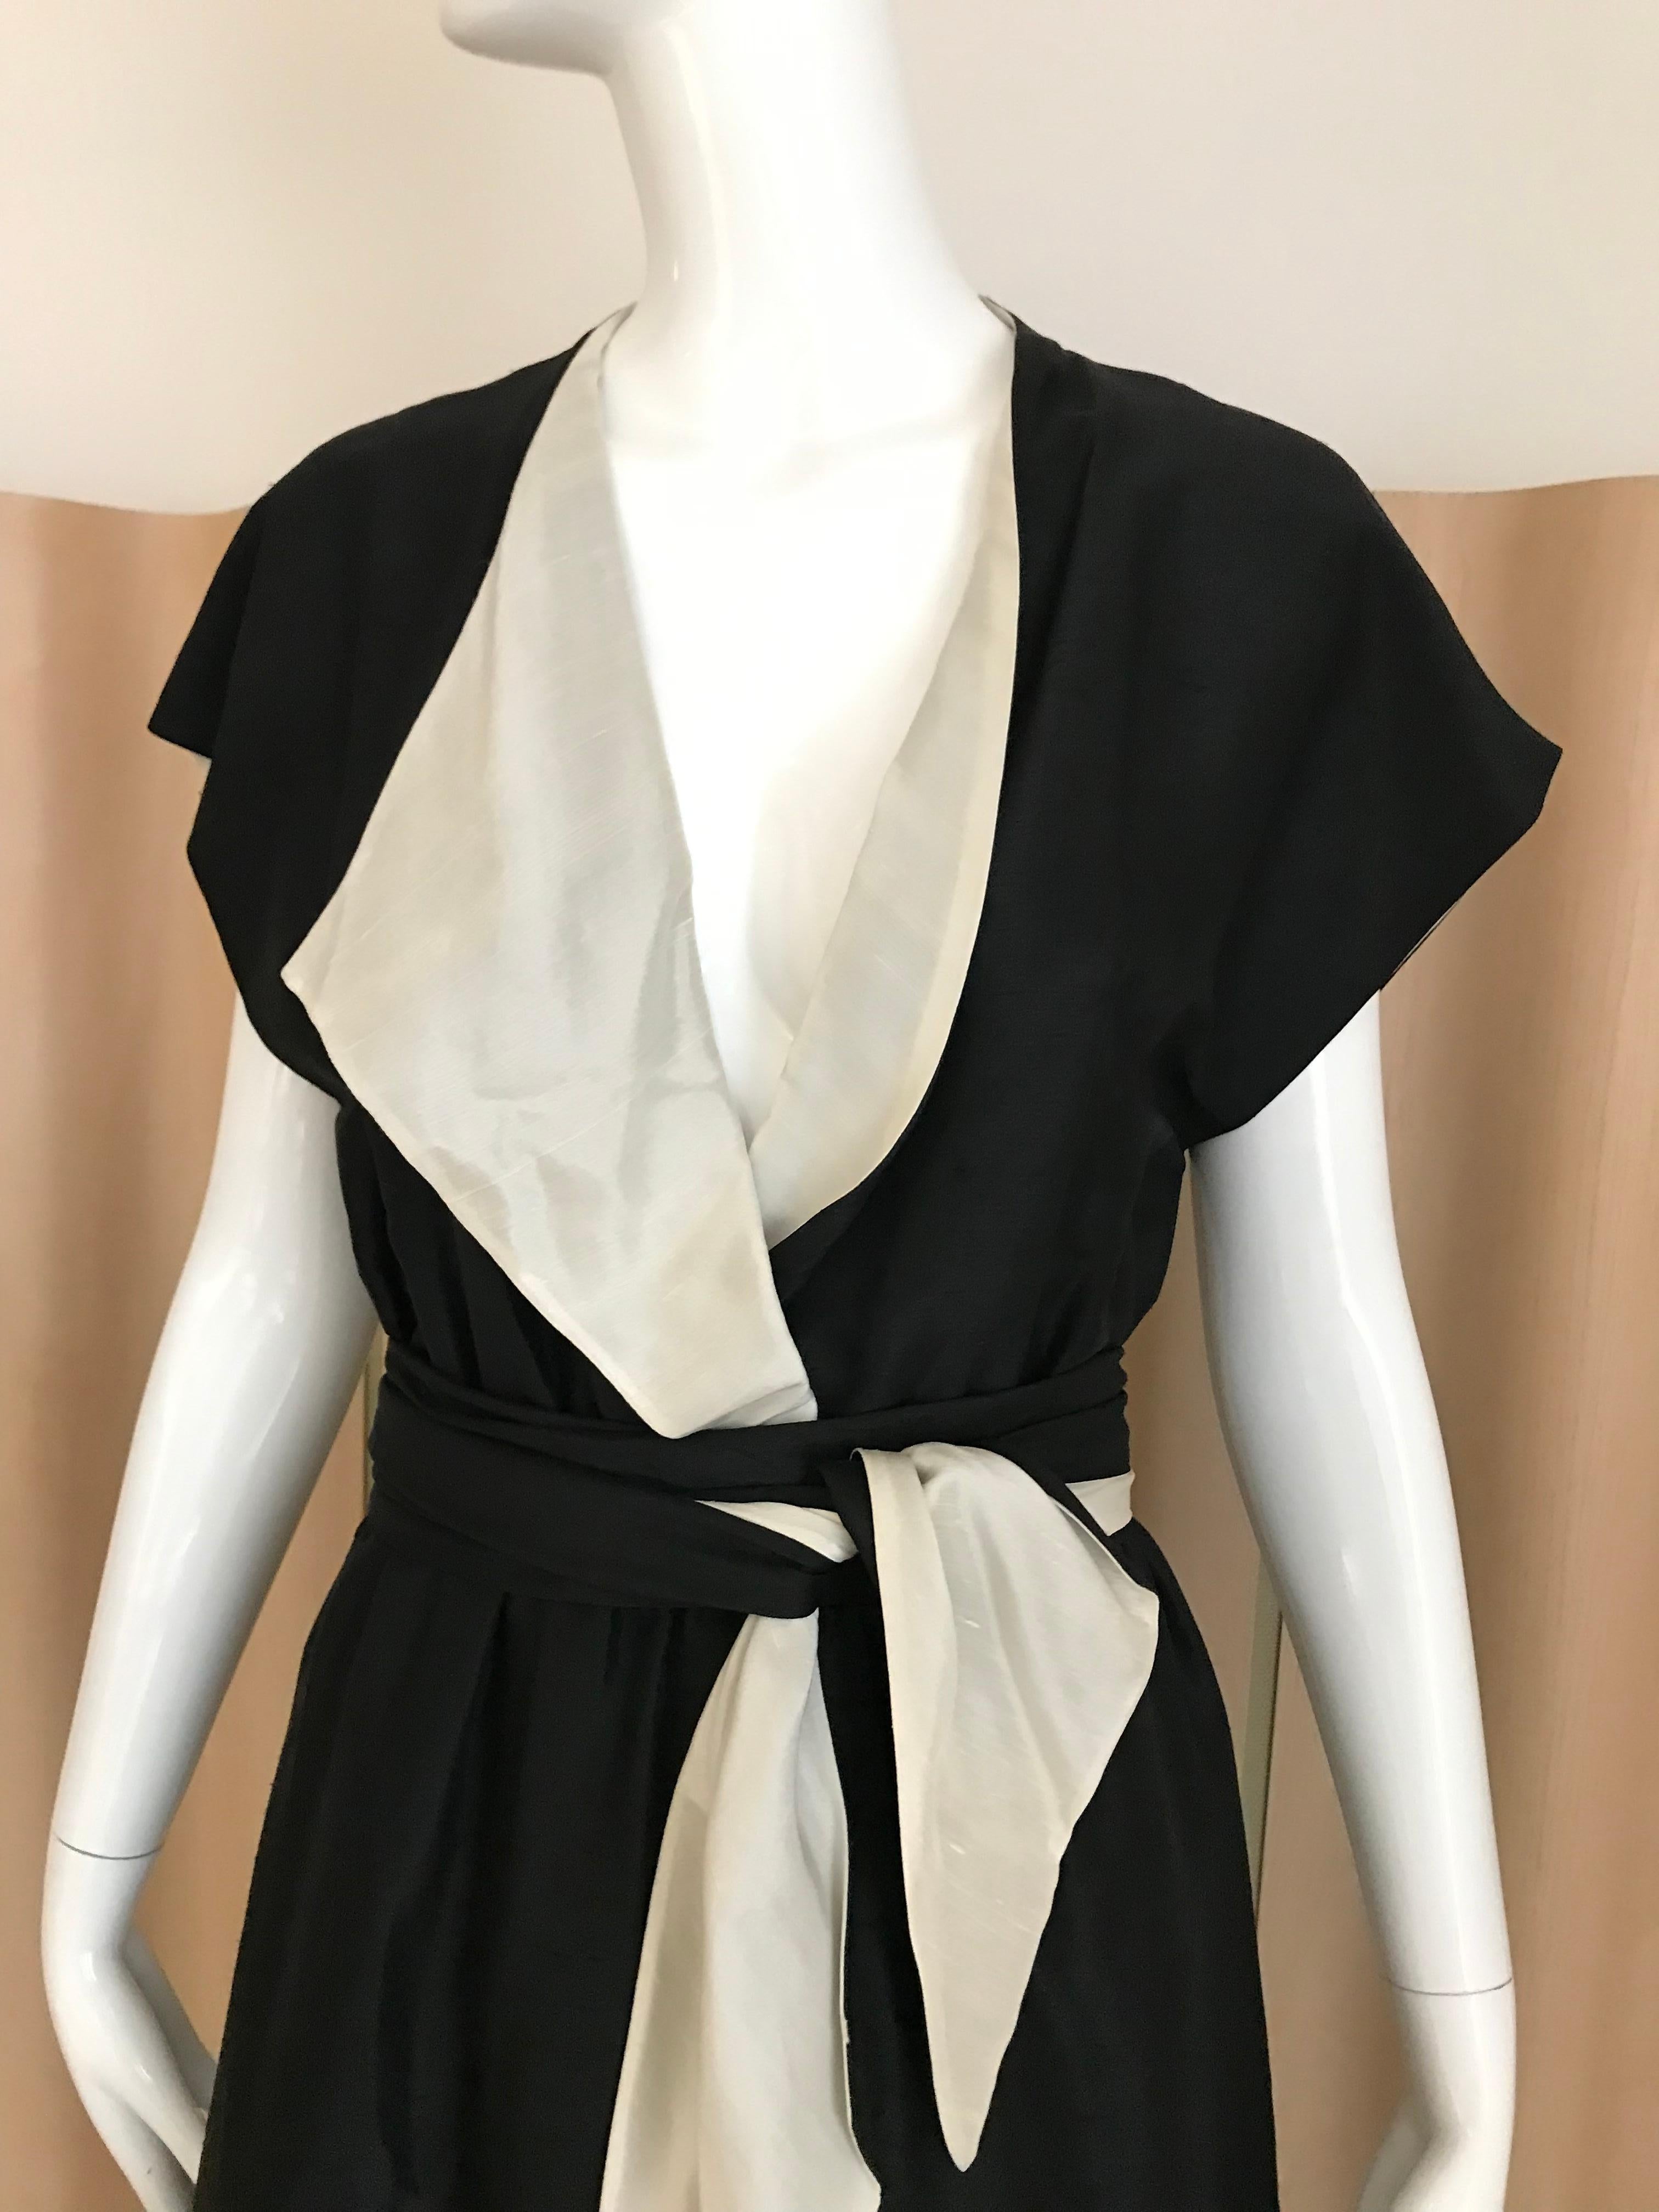 Timeless Vintage HALSTON Black and Cream silk wrap cocktail  dress with elastic waist with silk sash. Fit size 6
Dress has creme silk lining.  
Bust: 36 inches/ elastic waist 